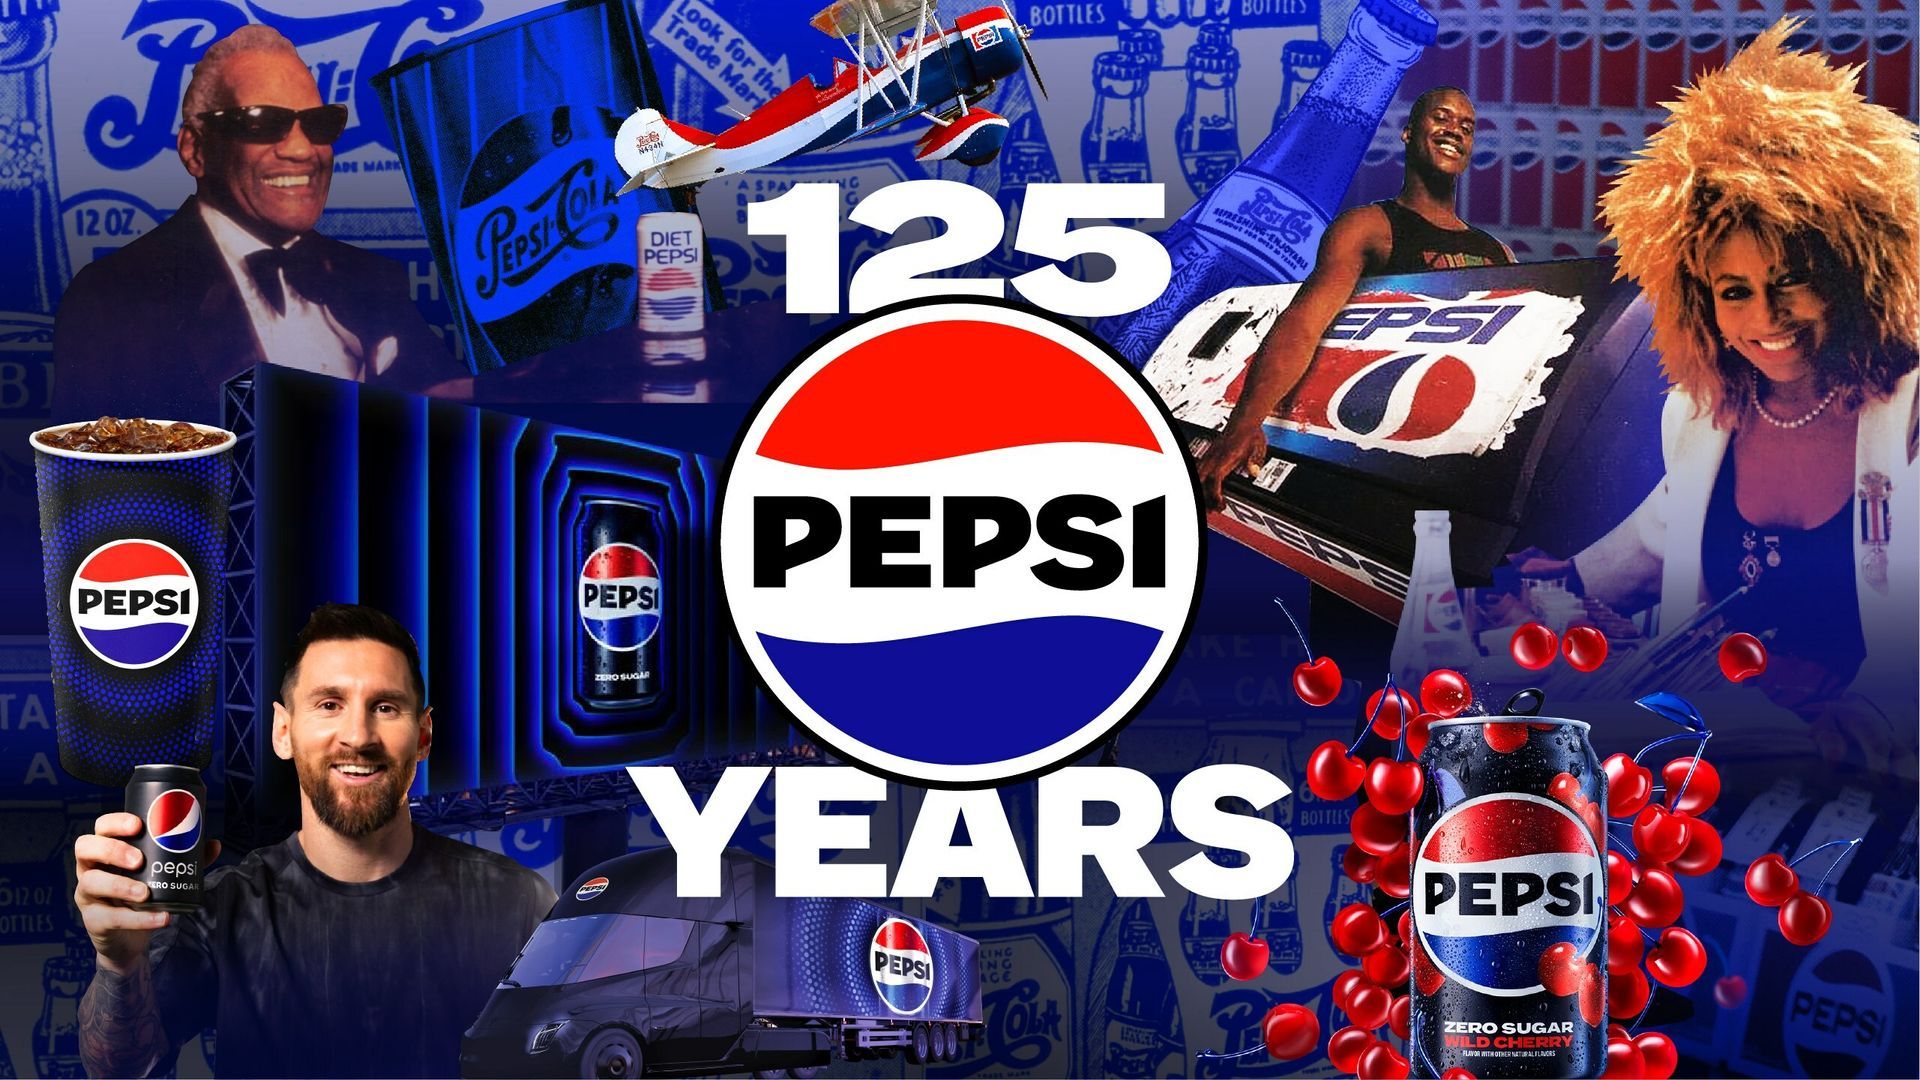 Pepsi_celebrates_its_historic_125th-Anniversary_with_125-day-long_campaign_spotlighting_iconic_moments_of_the_past_present_and_future_Cola-Zero.com